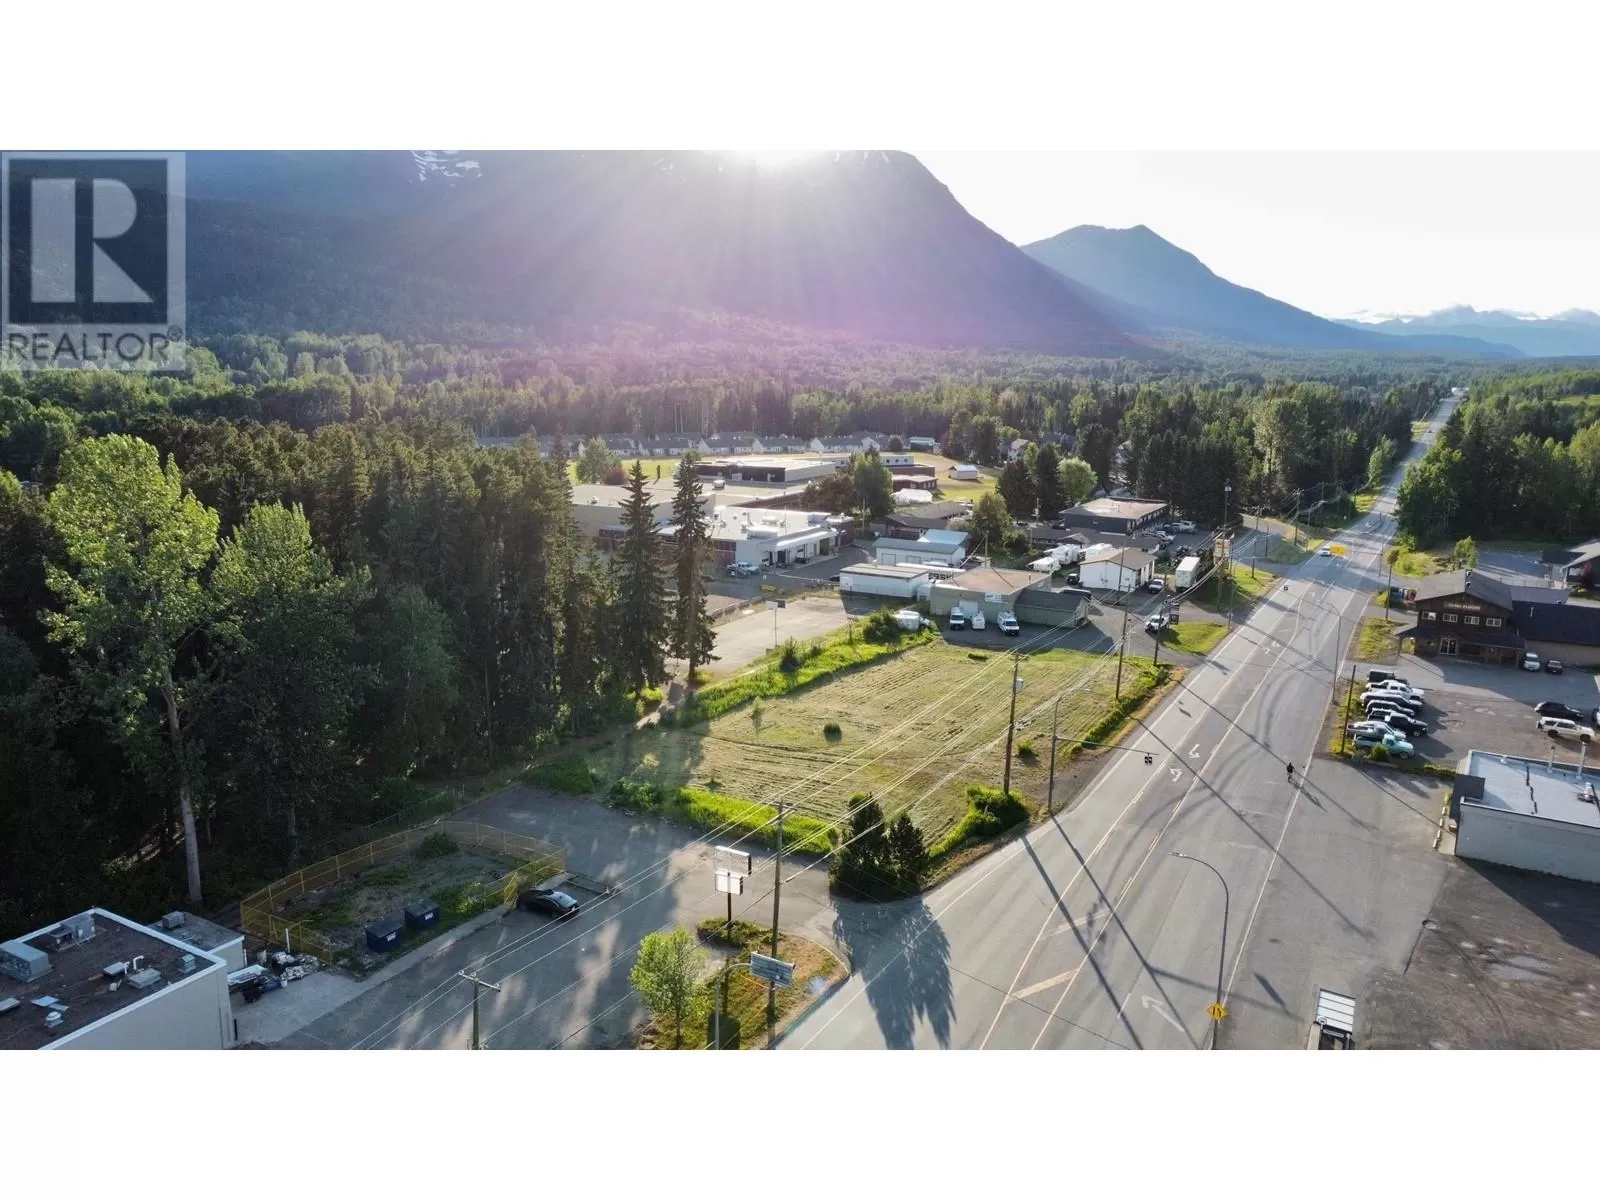 Lots 4-7 W 16 Highway, Smithers, British Columbia V0J 2N1